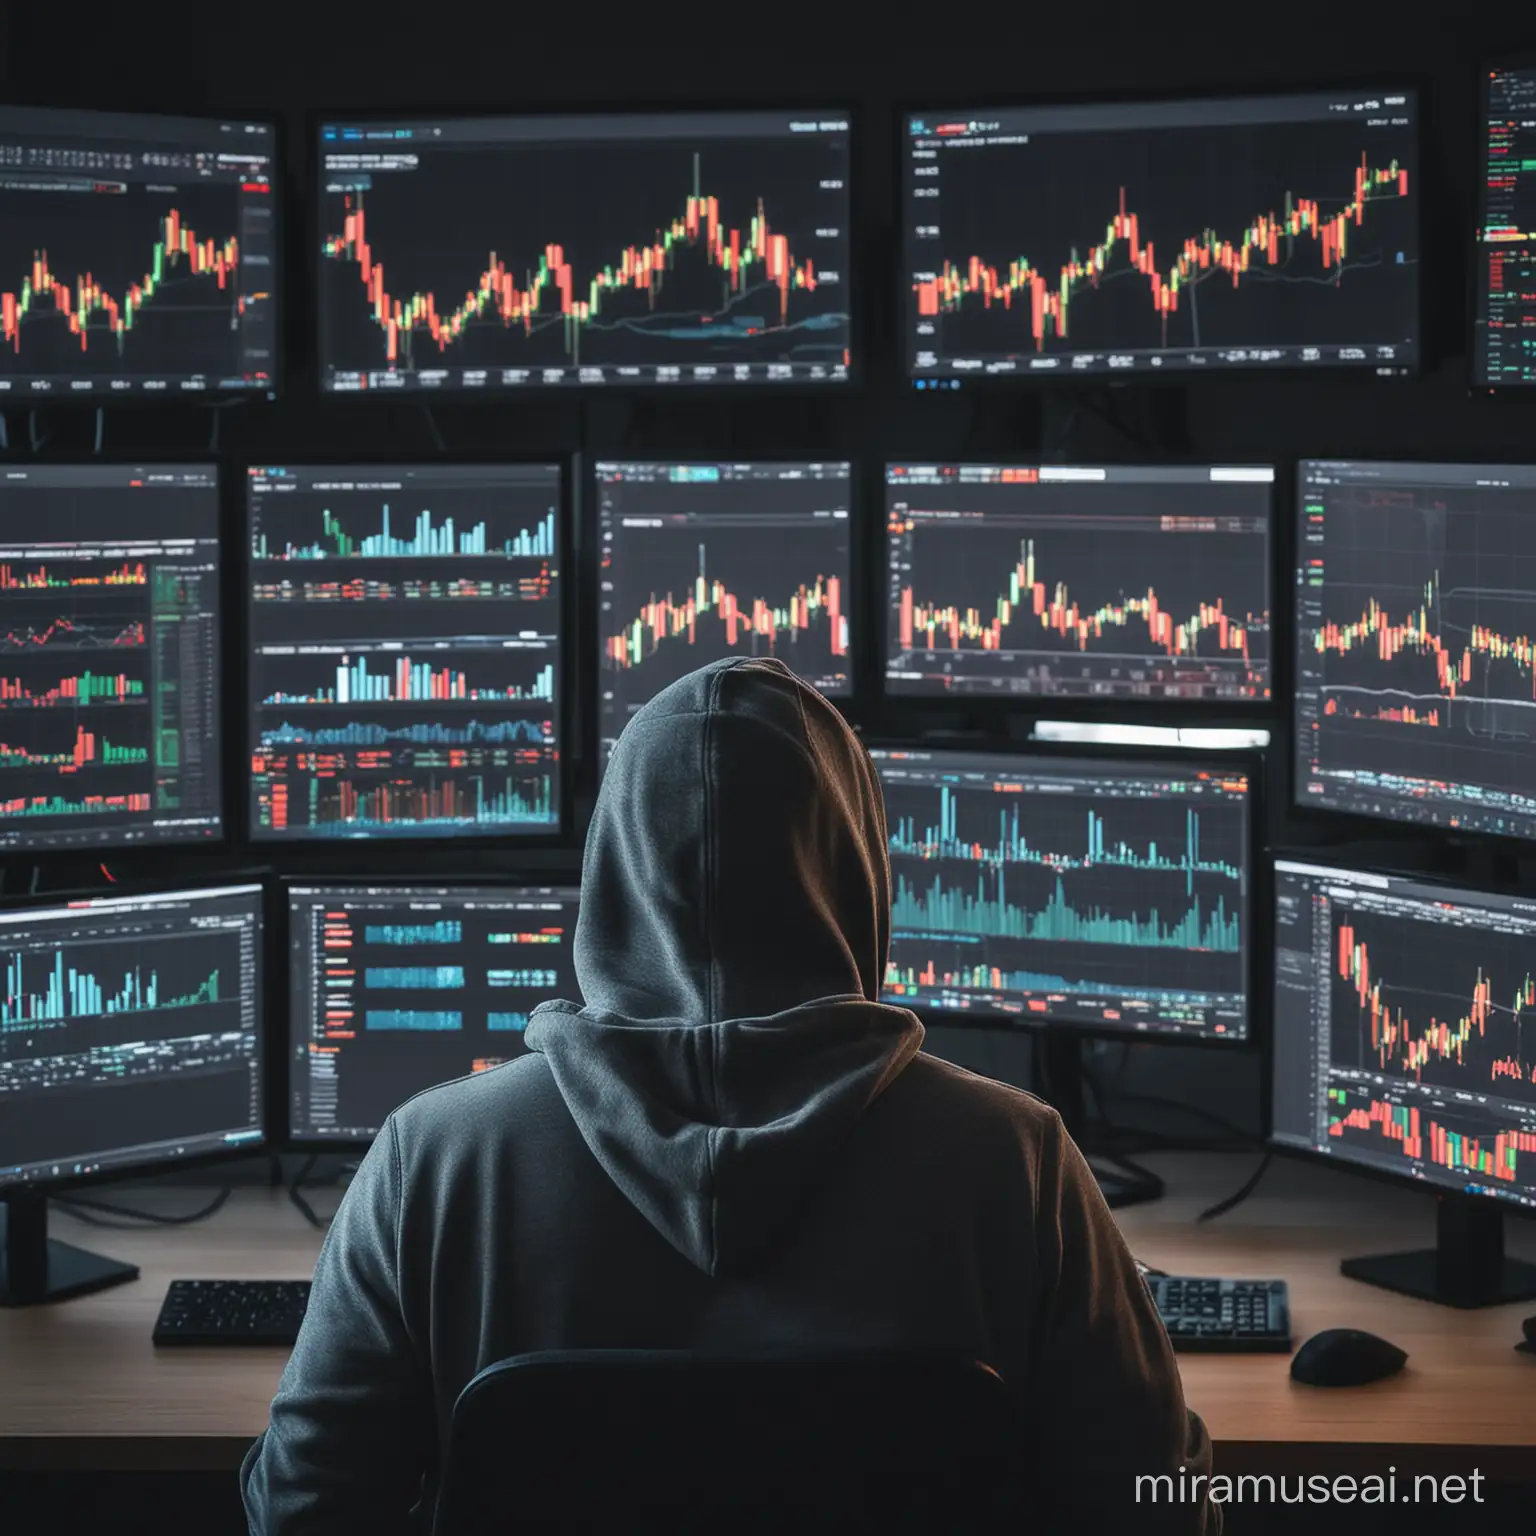 man in hoodie in front of two computer screens showing trading charts, dark setting